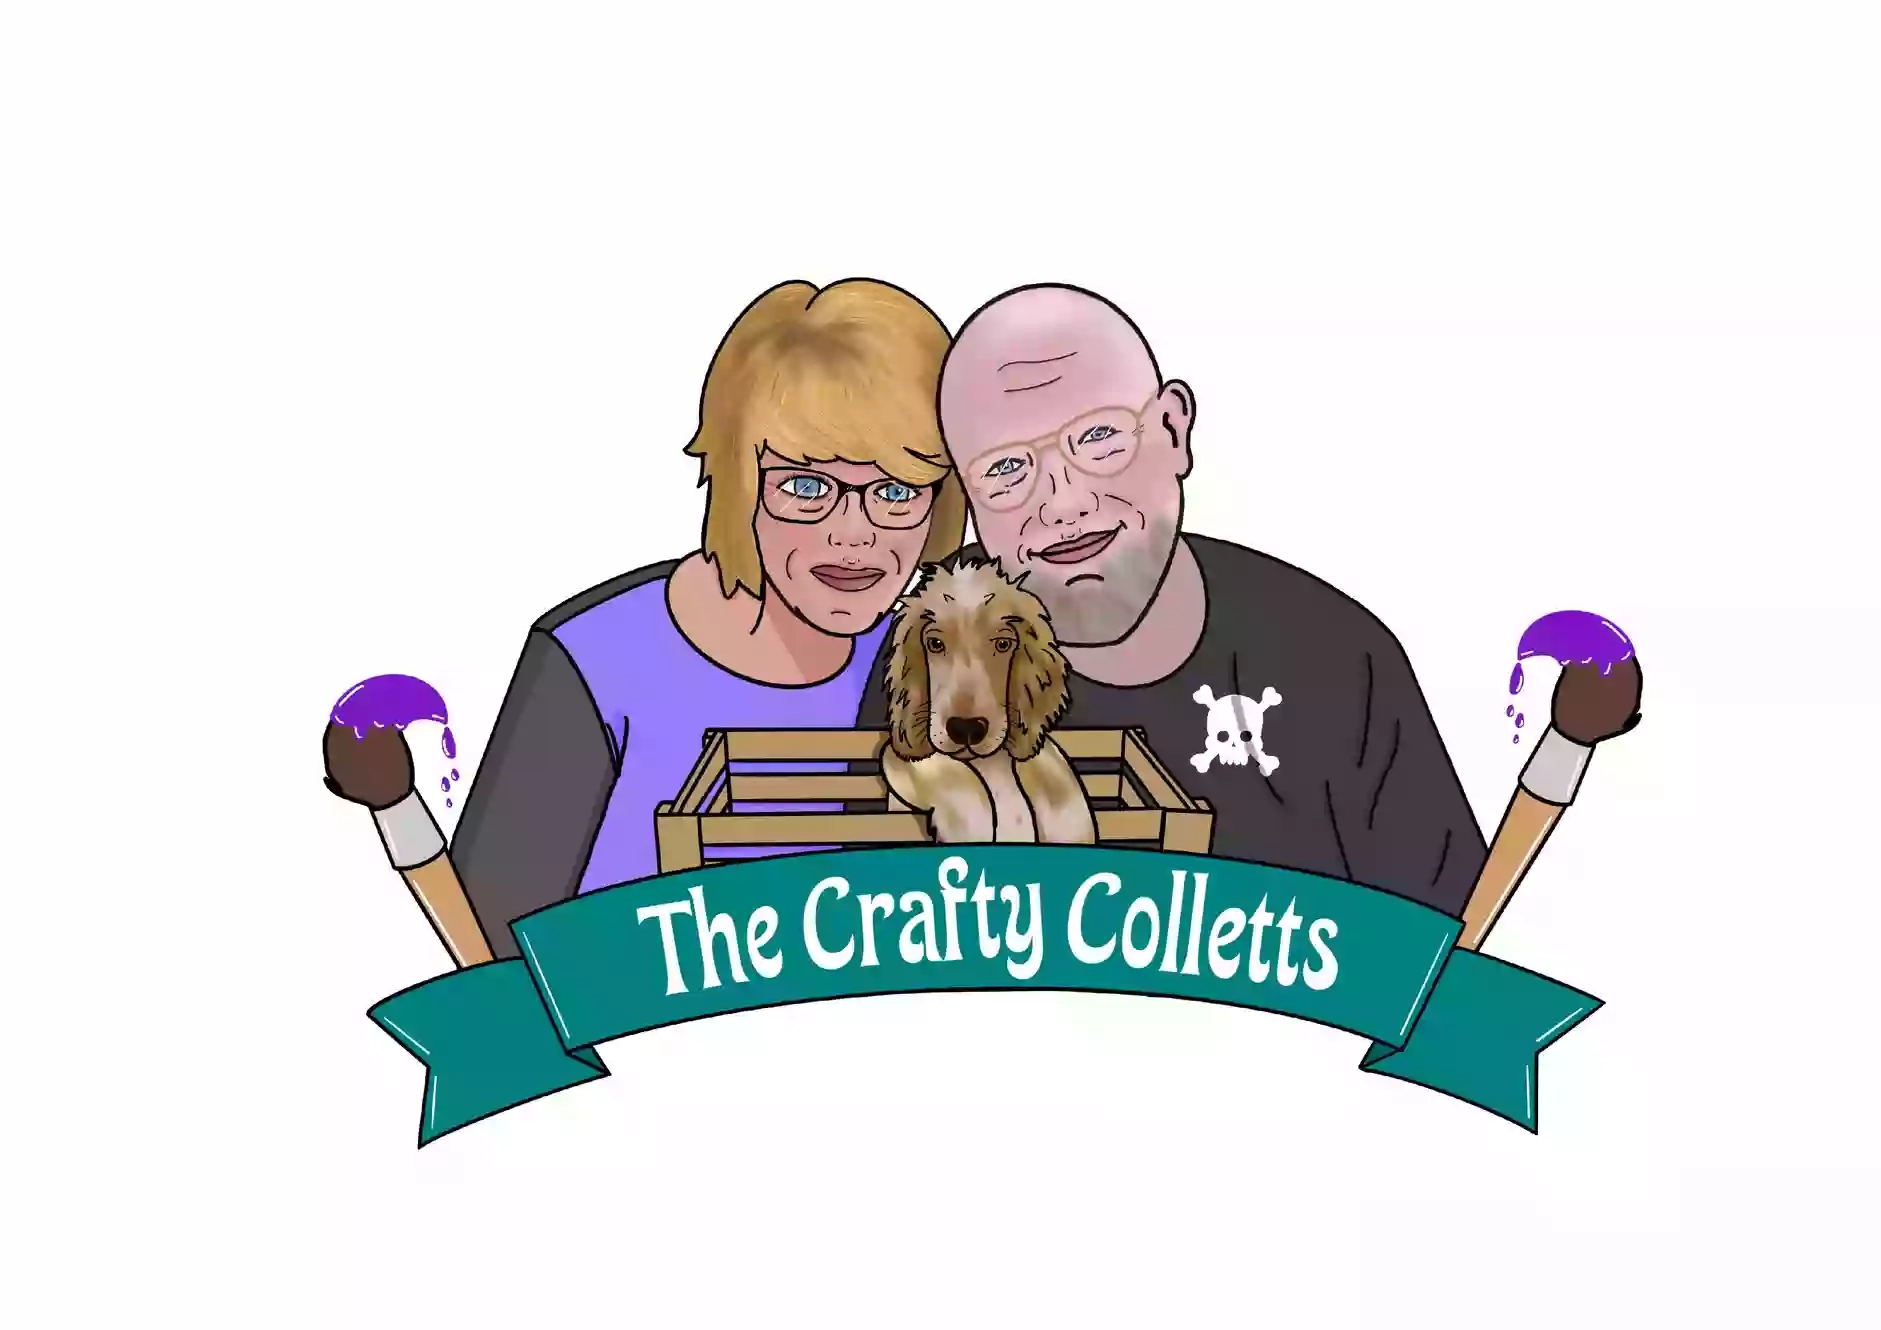 THE CRAFTY COLLETTS